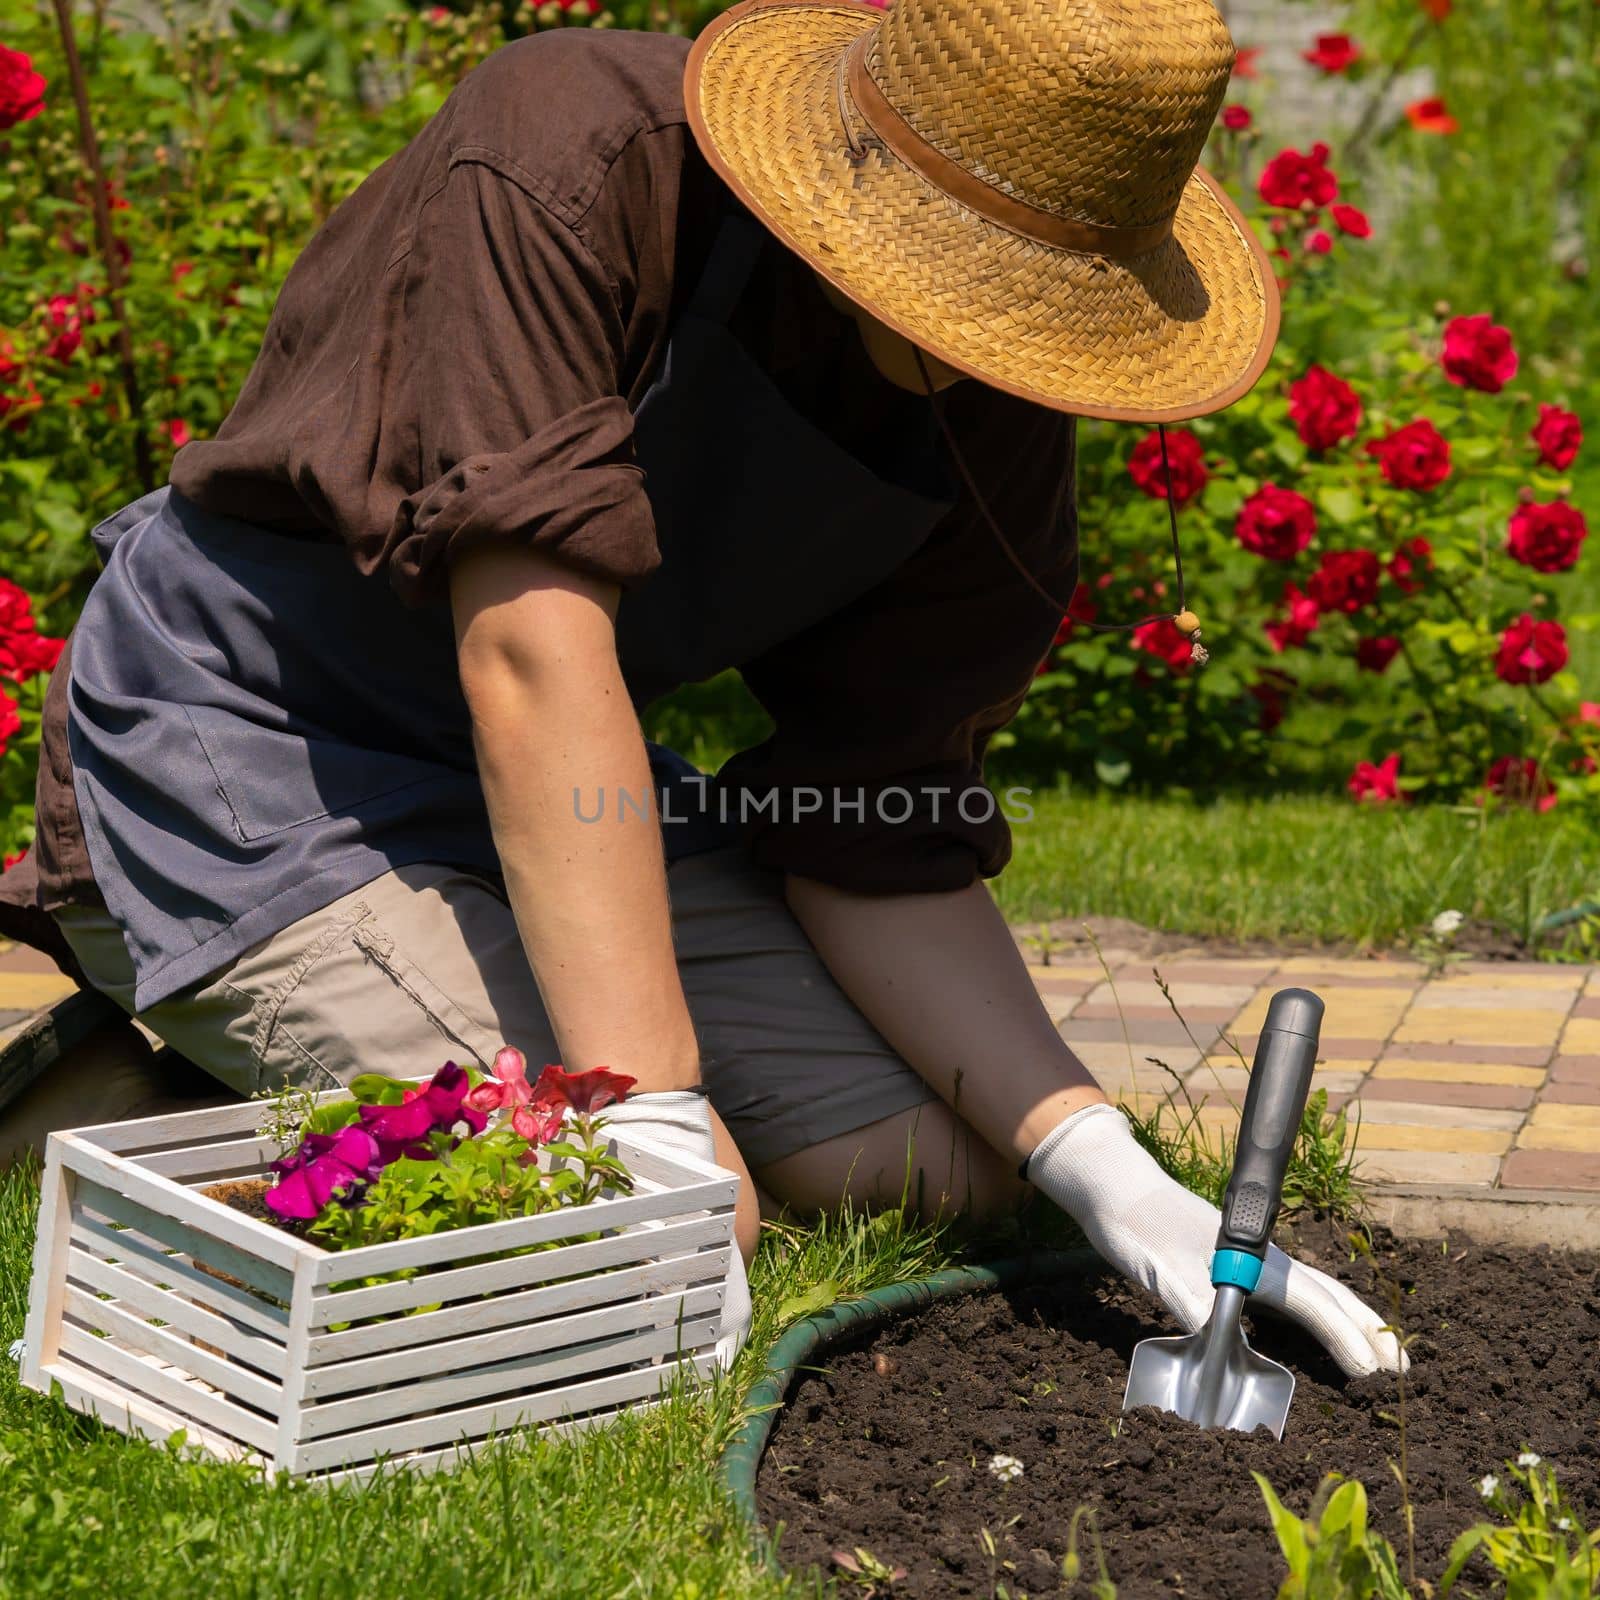 A young man in a straw hat and hands in gloves is engaged in gardening work, planting flower seedlings. A professional gardener cultivates plants, farms petunia seedlings near the rose bushes.